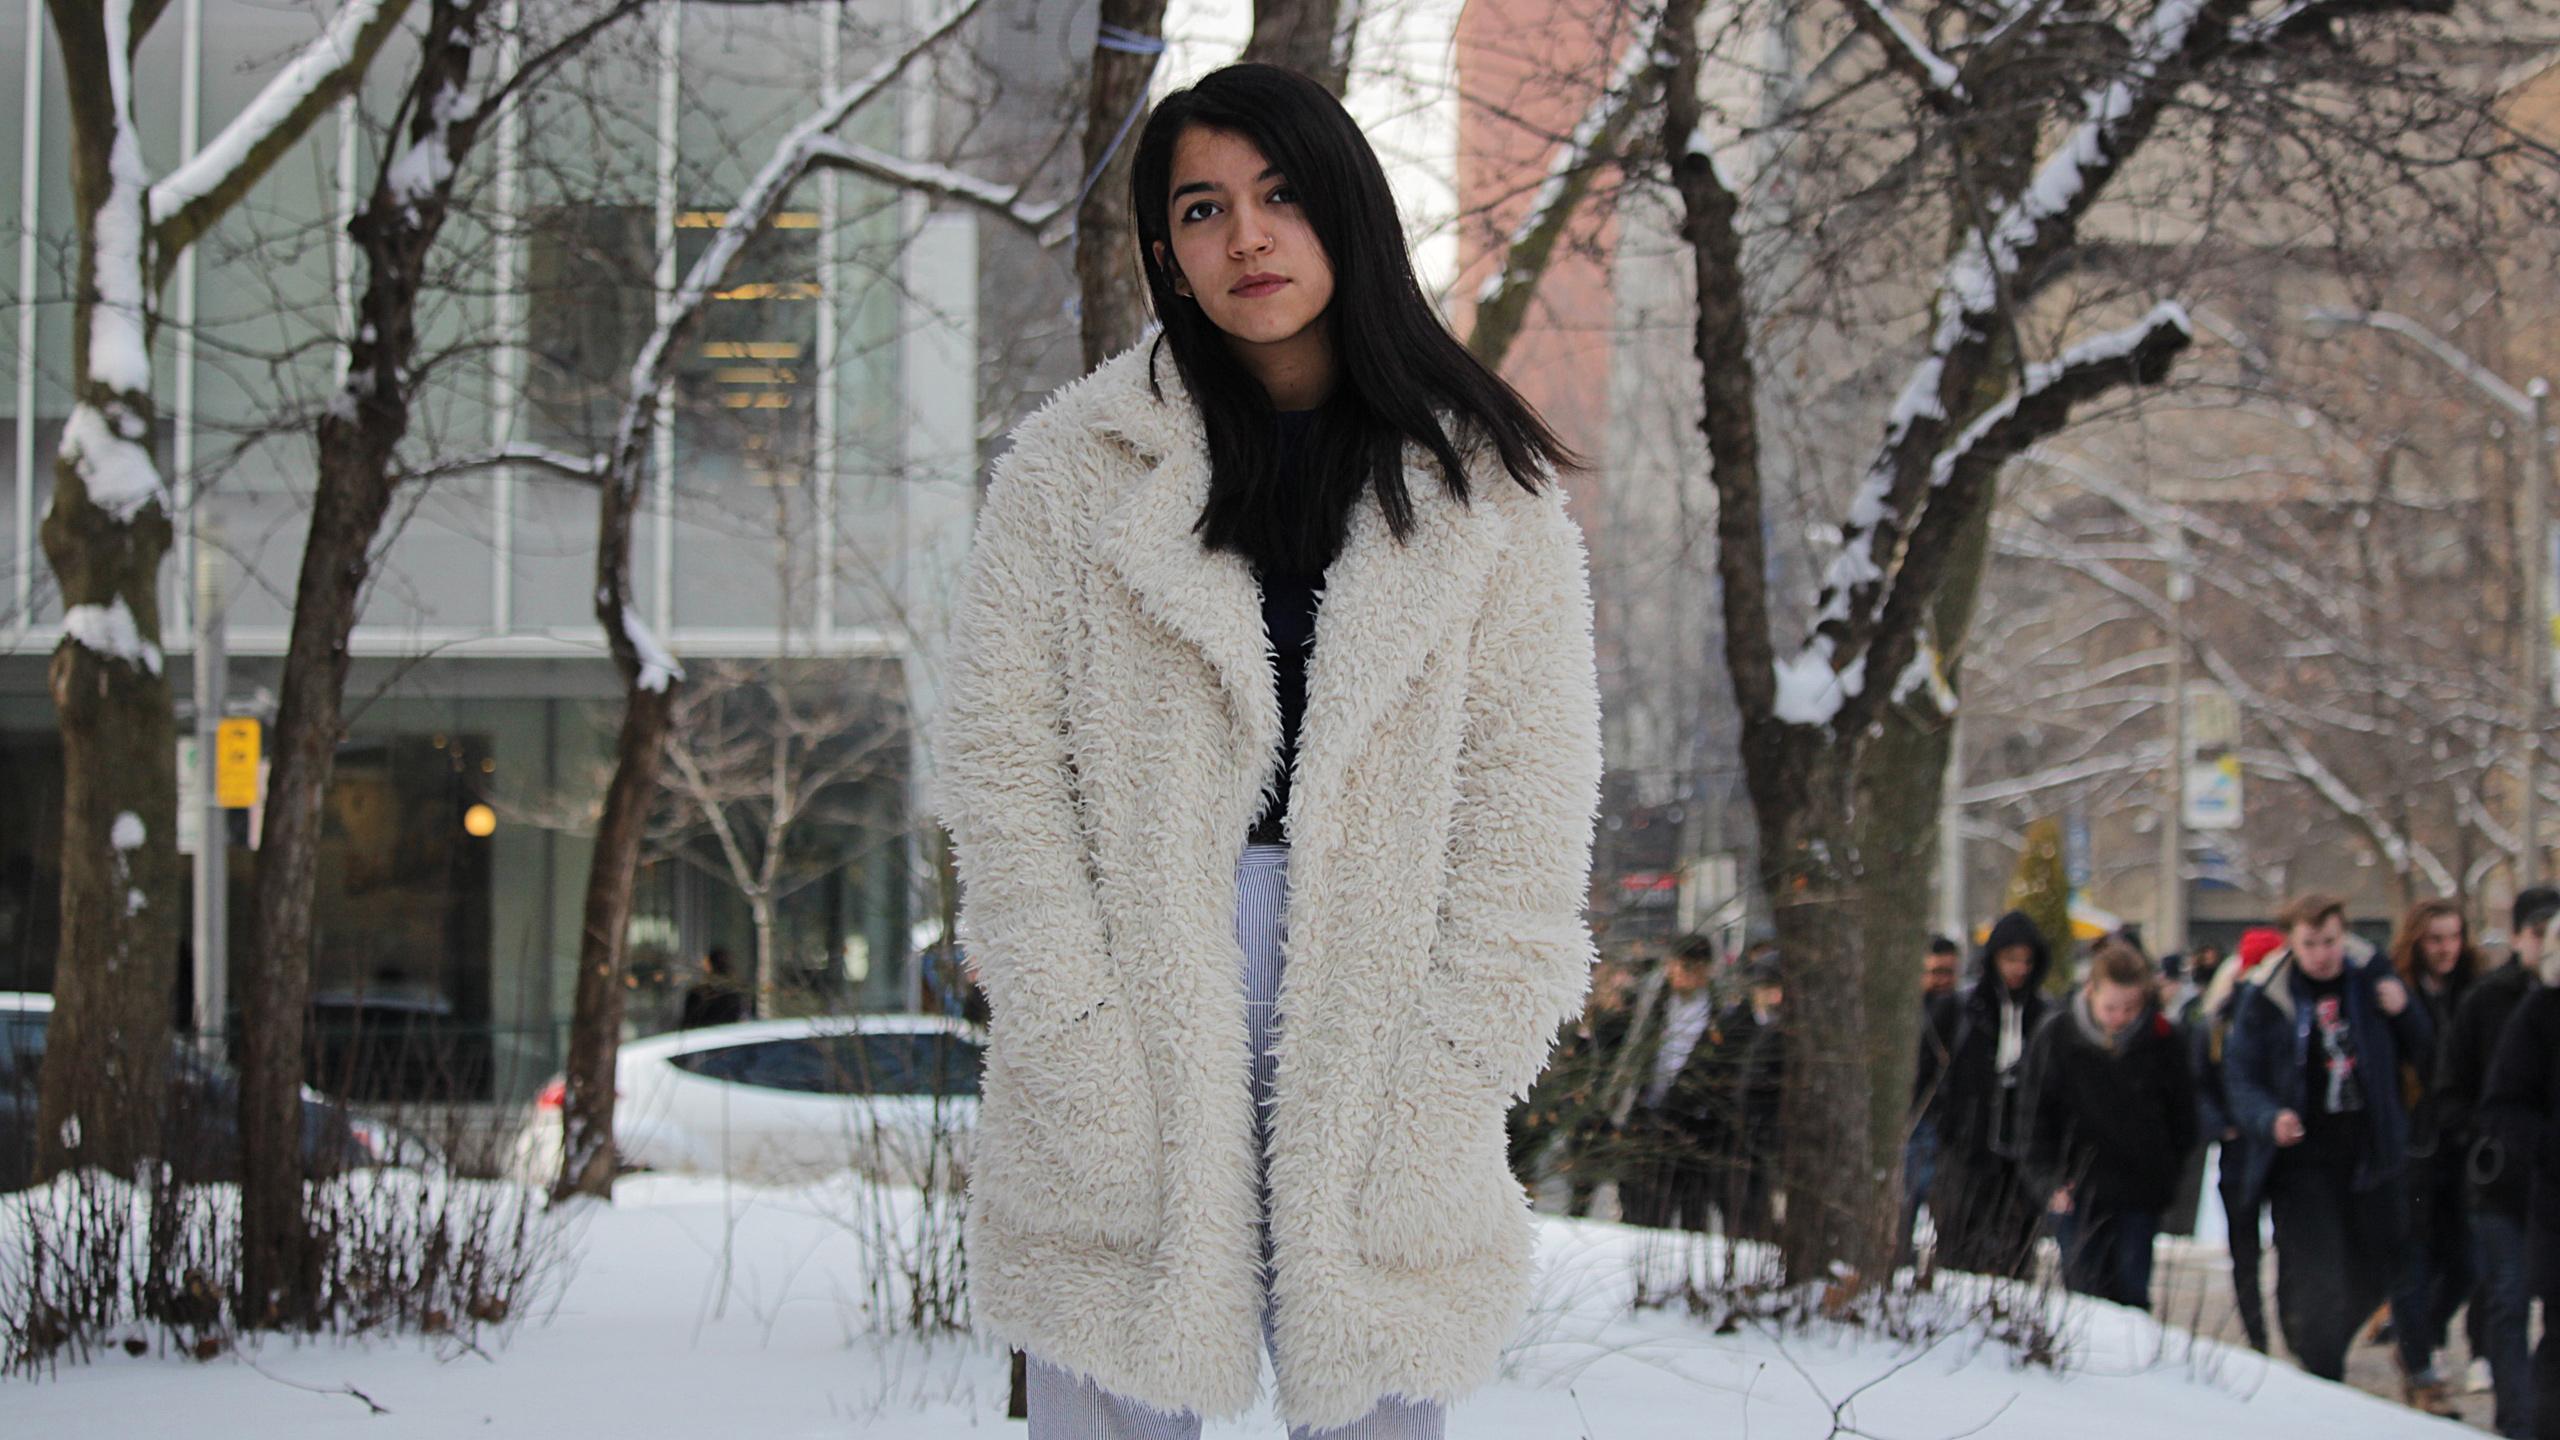 standing on Ryerson campus is a person wearing a fur coat. The background is a snowy winter wonderland.